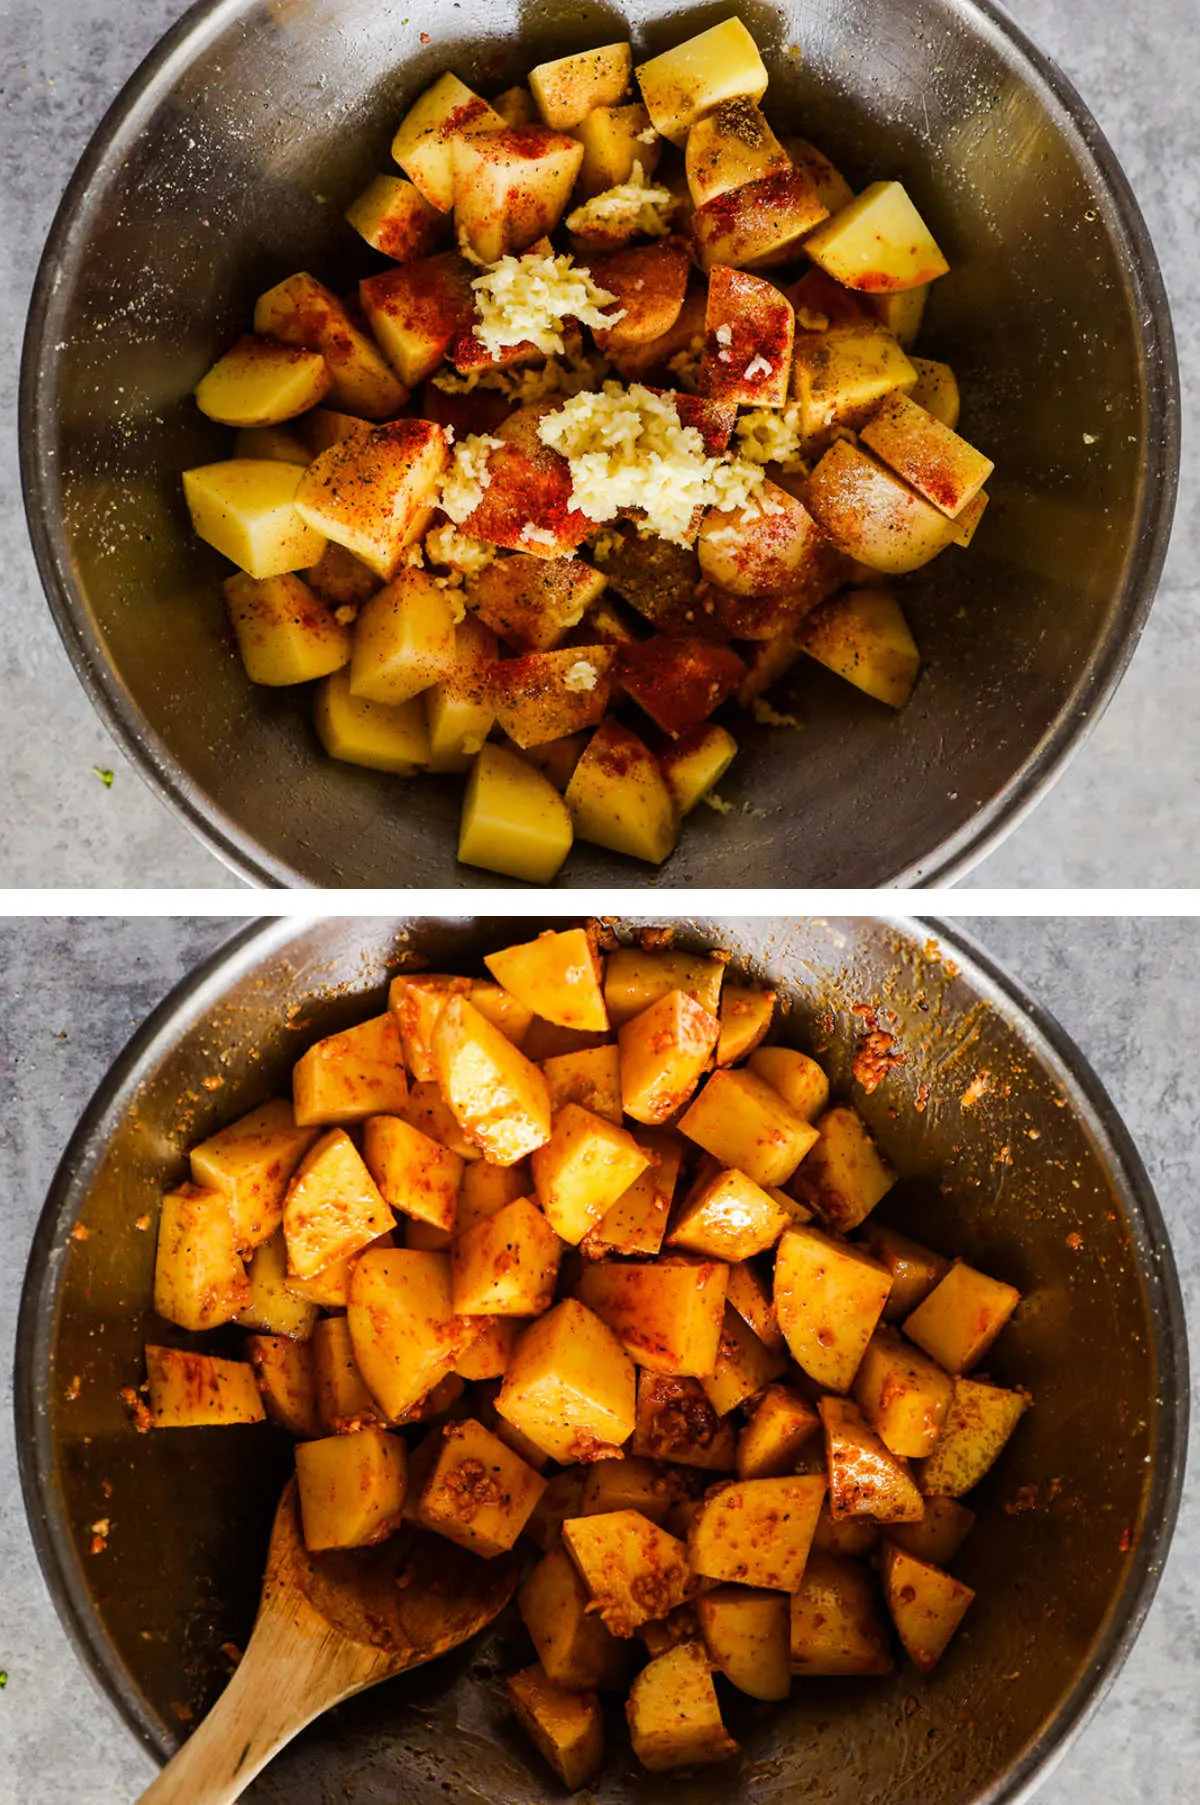 Two overhead images in one: 1. Chopped potatoes in metal bowl with all the spices and minced garlic on top. 2. Garlic and all spices have been mixed thoroughly with potatoes. A wooden spoon sits in the bowl.